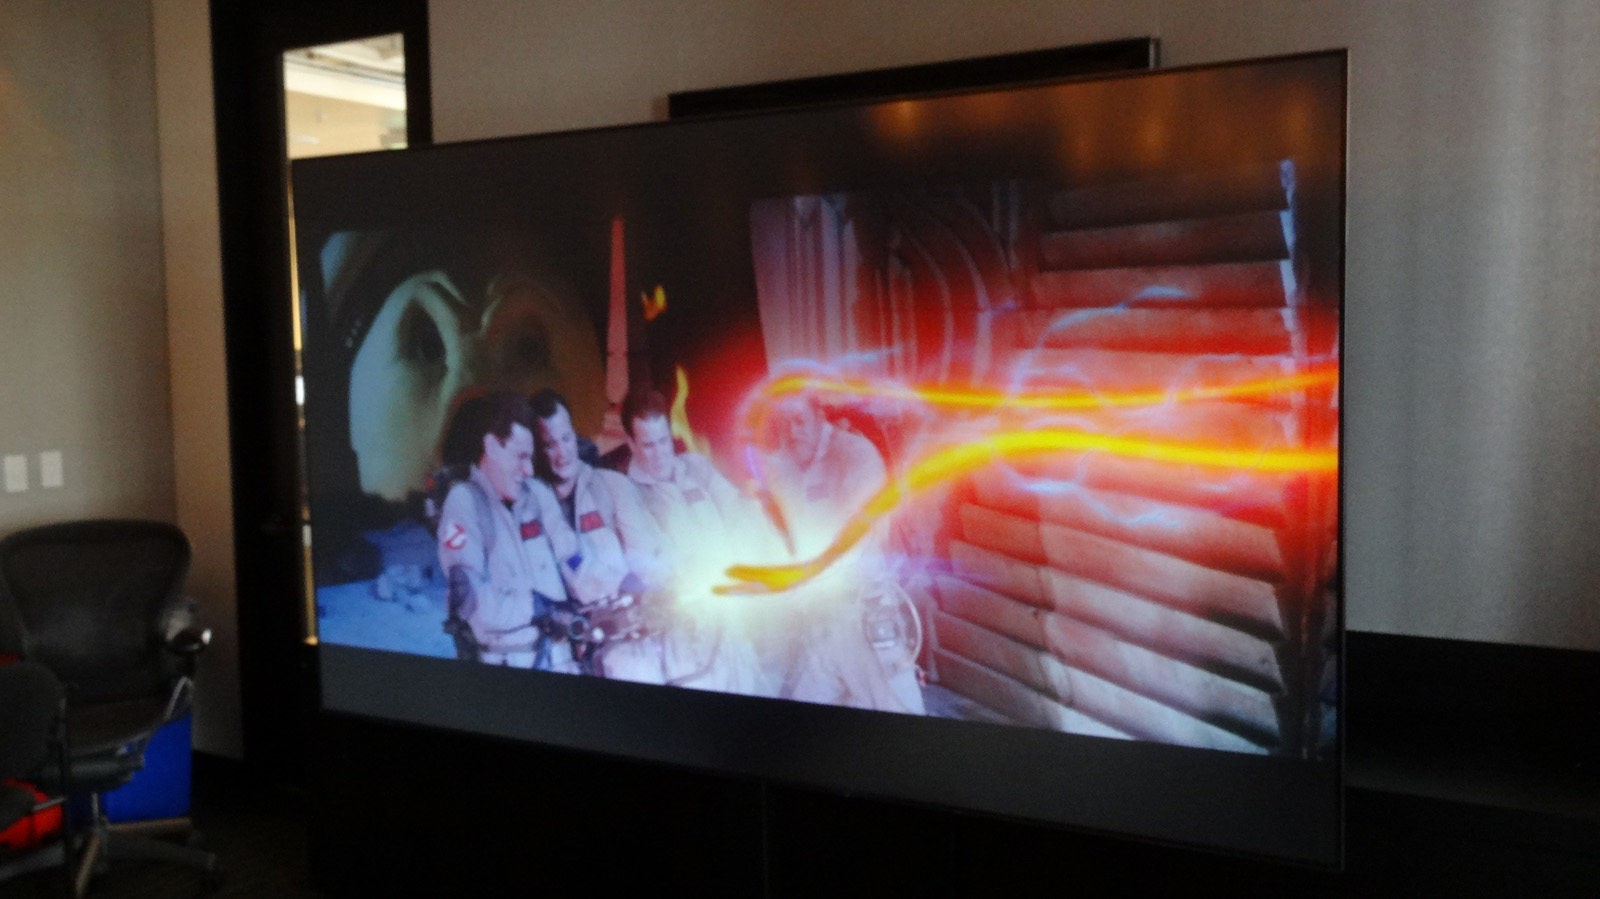 LG Laser TV Hands On: Your Wall’s Not Worthy